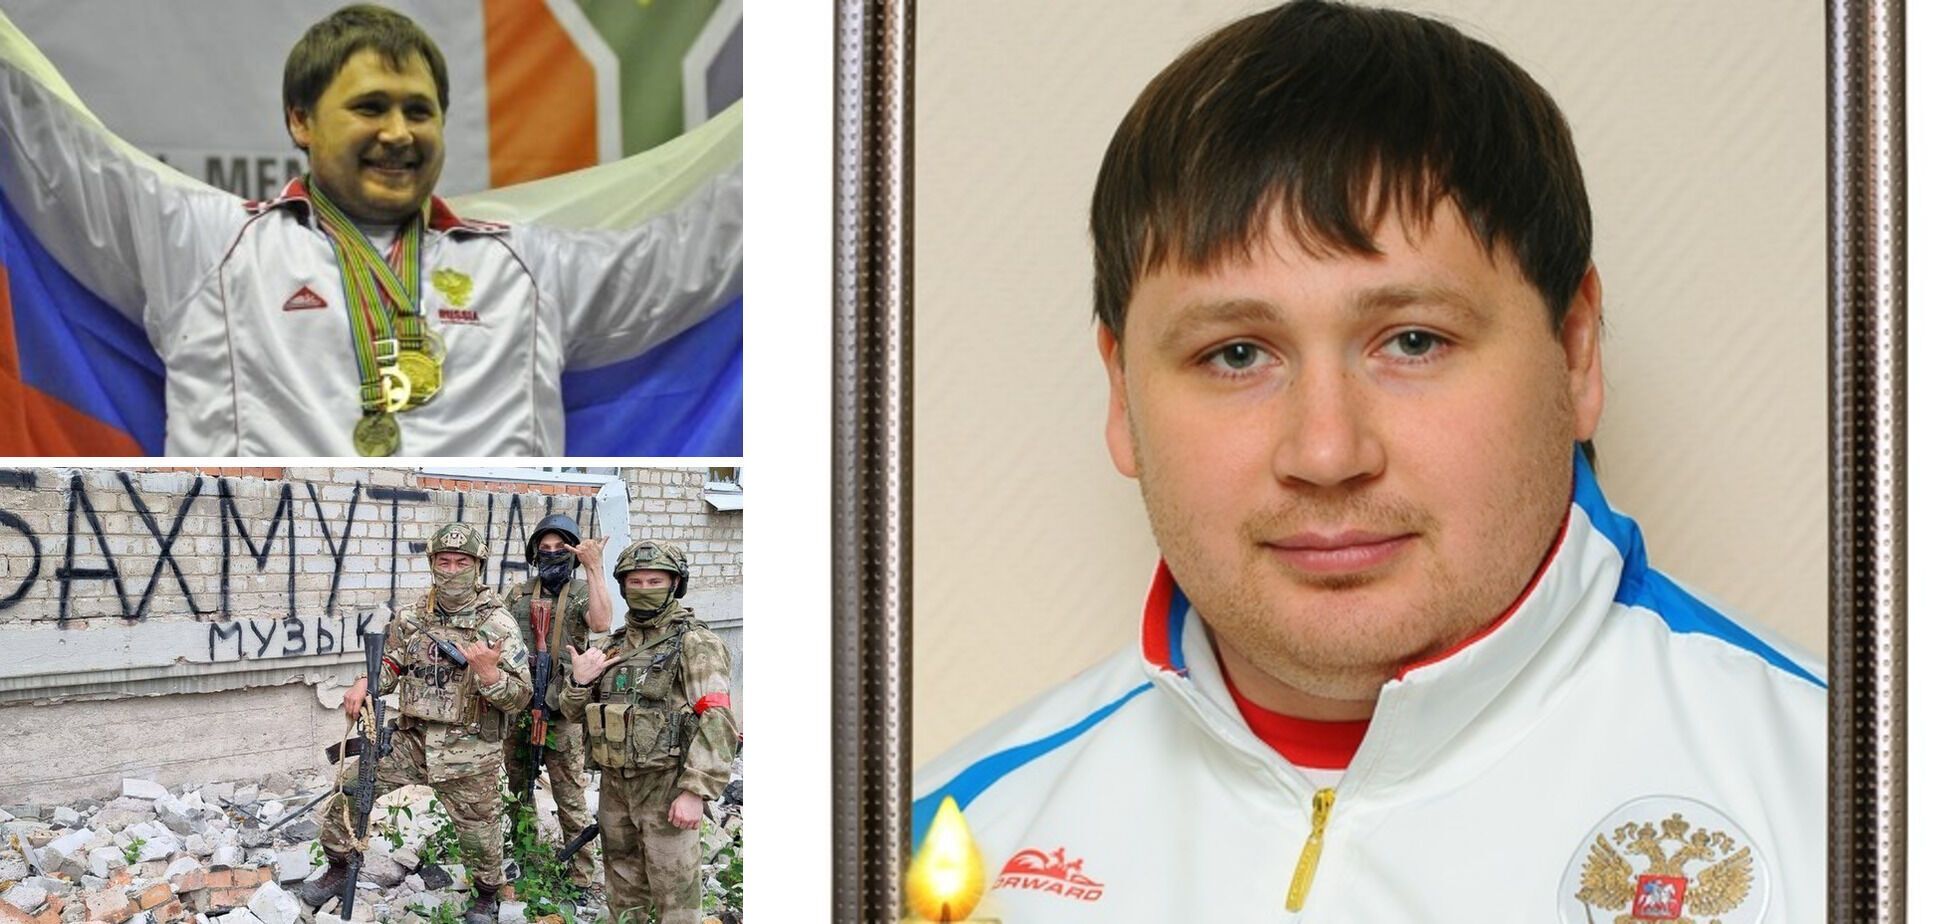 Russian hockey player came to kill Ukrainians and was eliminated by the AFU